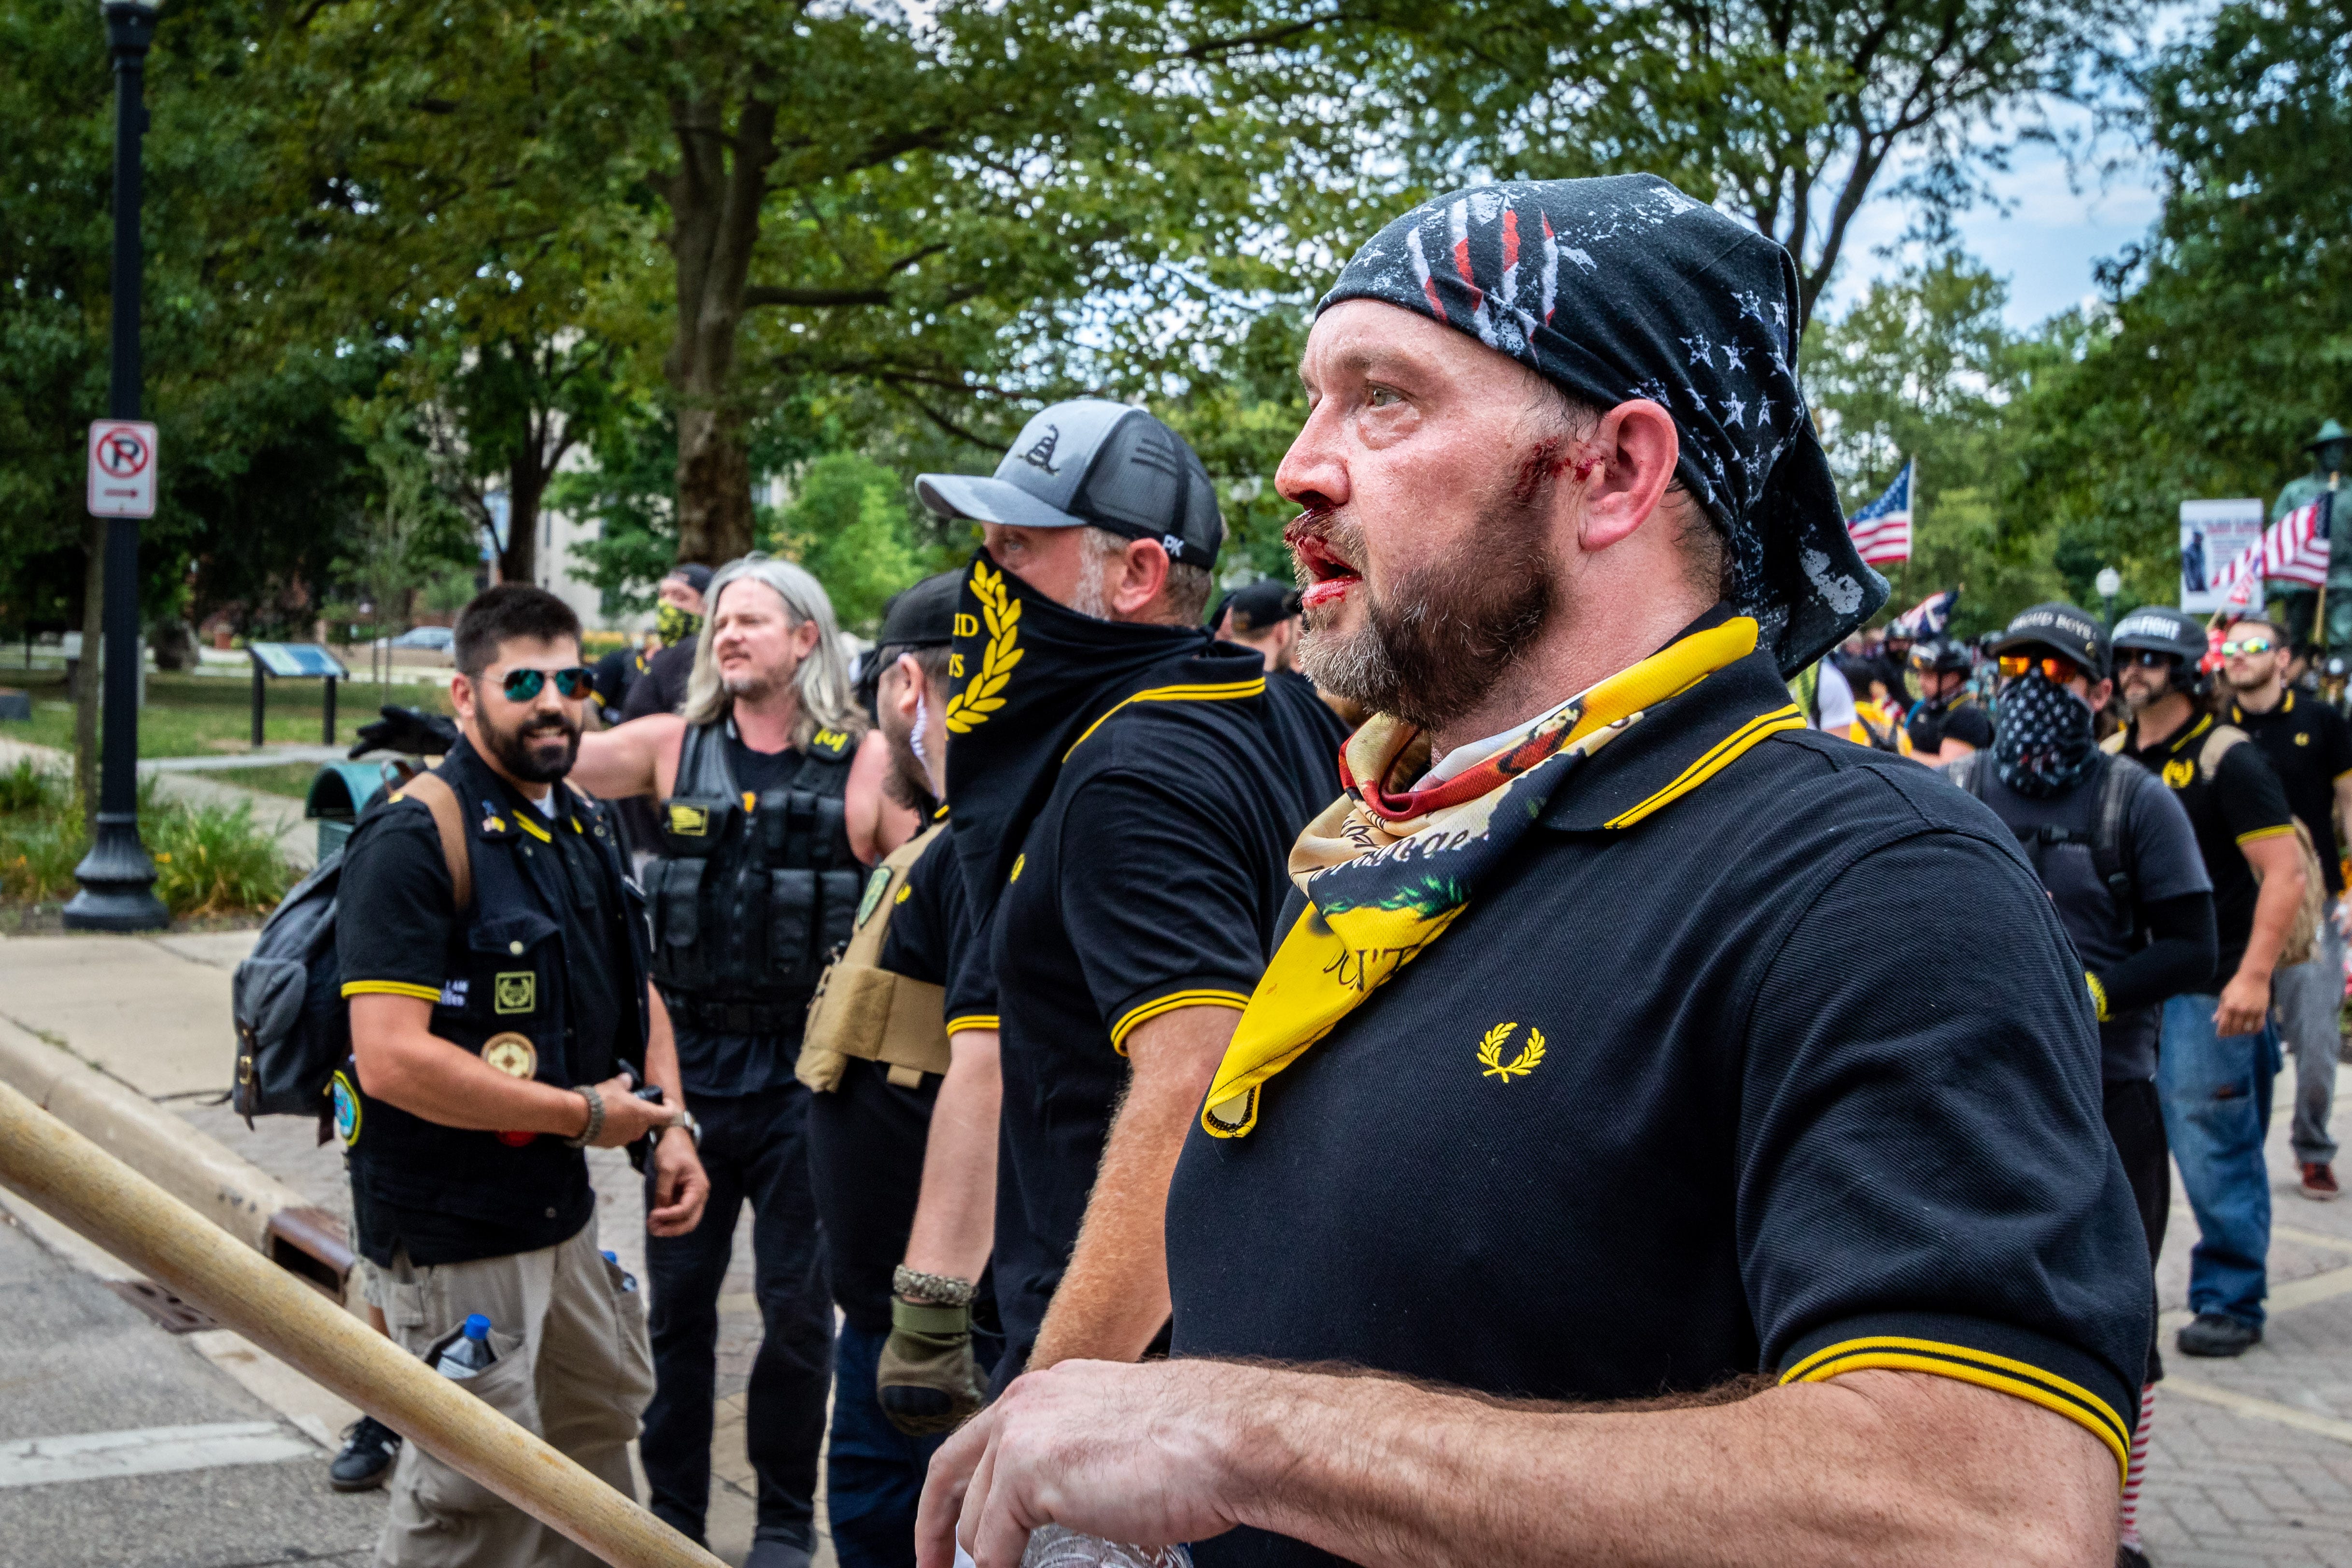 A Proud Boy has cuts on his face after clashing with counter-protestors.